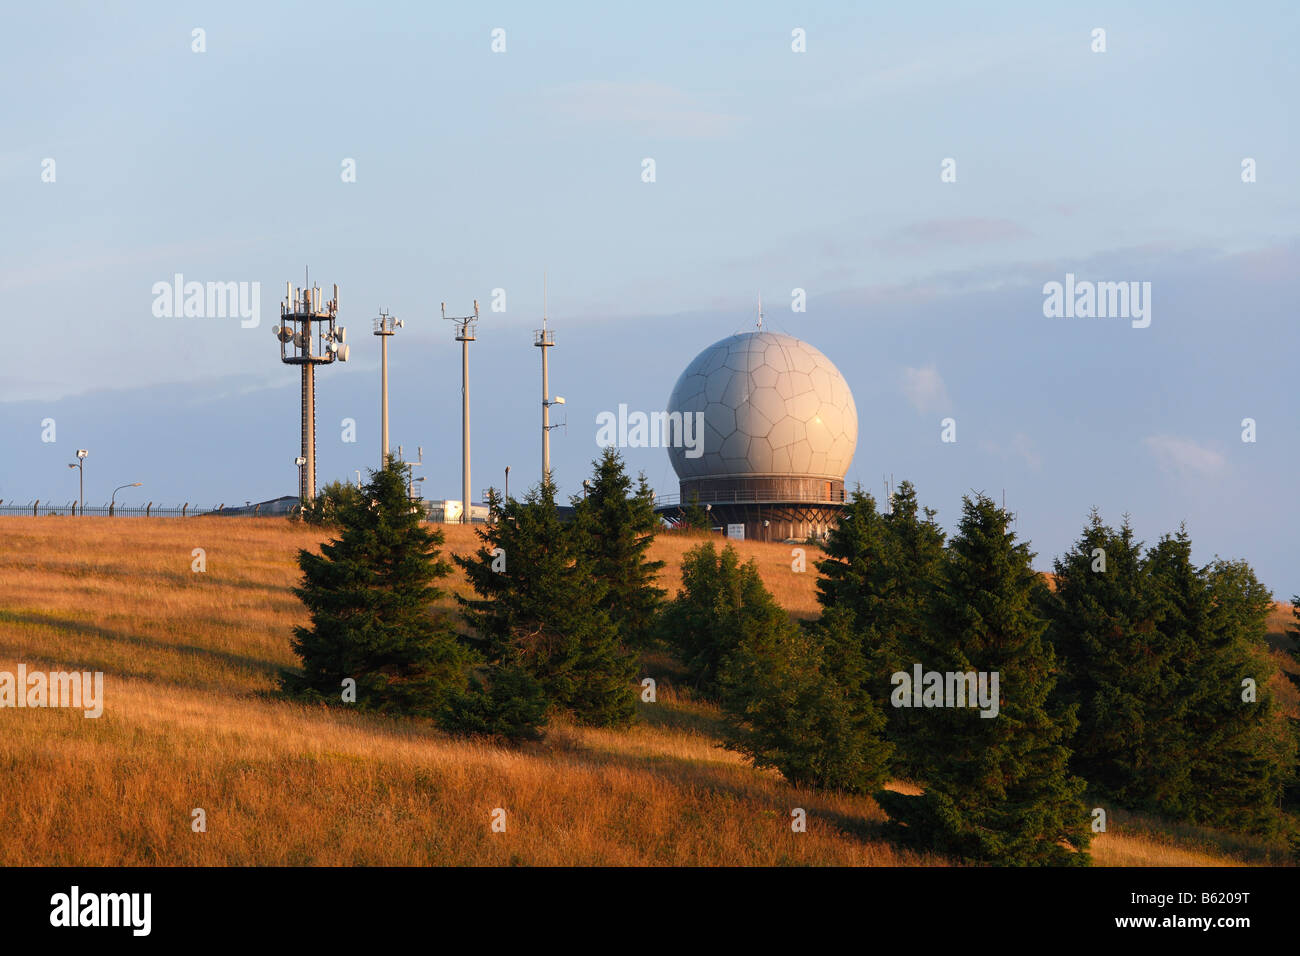 Radar dome and antenna systems on the Wasserkuppe plateau, Rhoen, Hesse, Germany, Europe Stock Photo